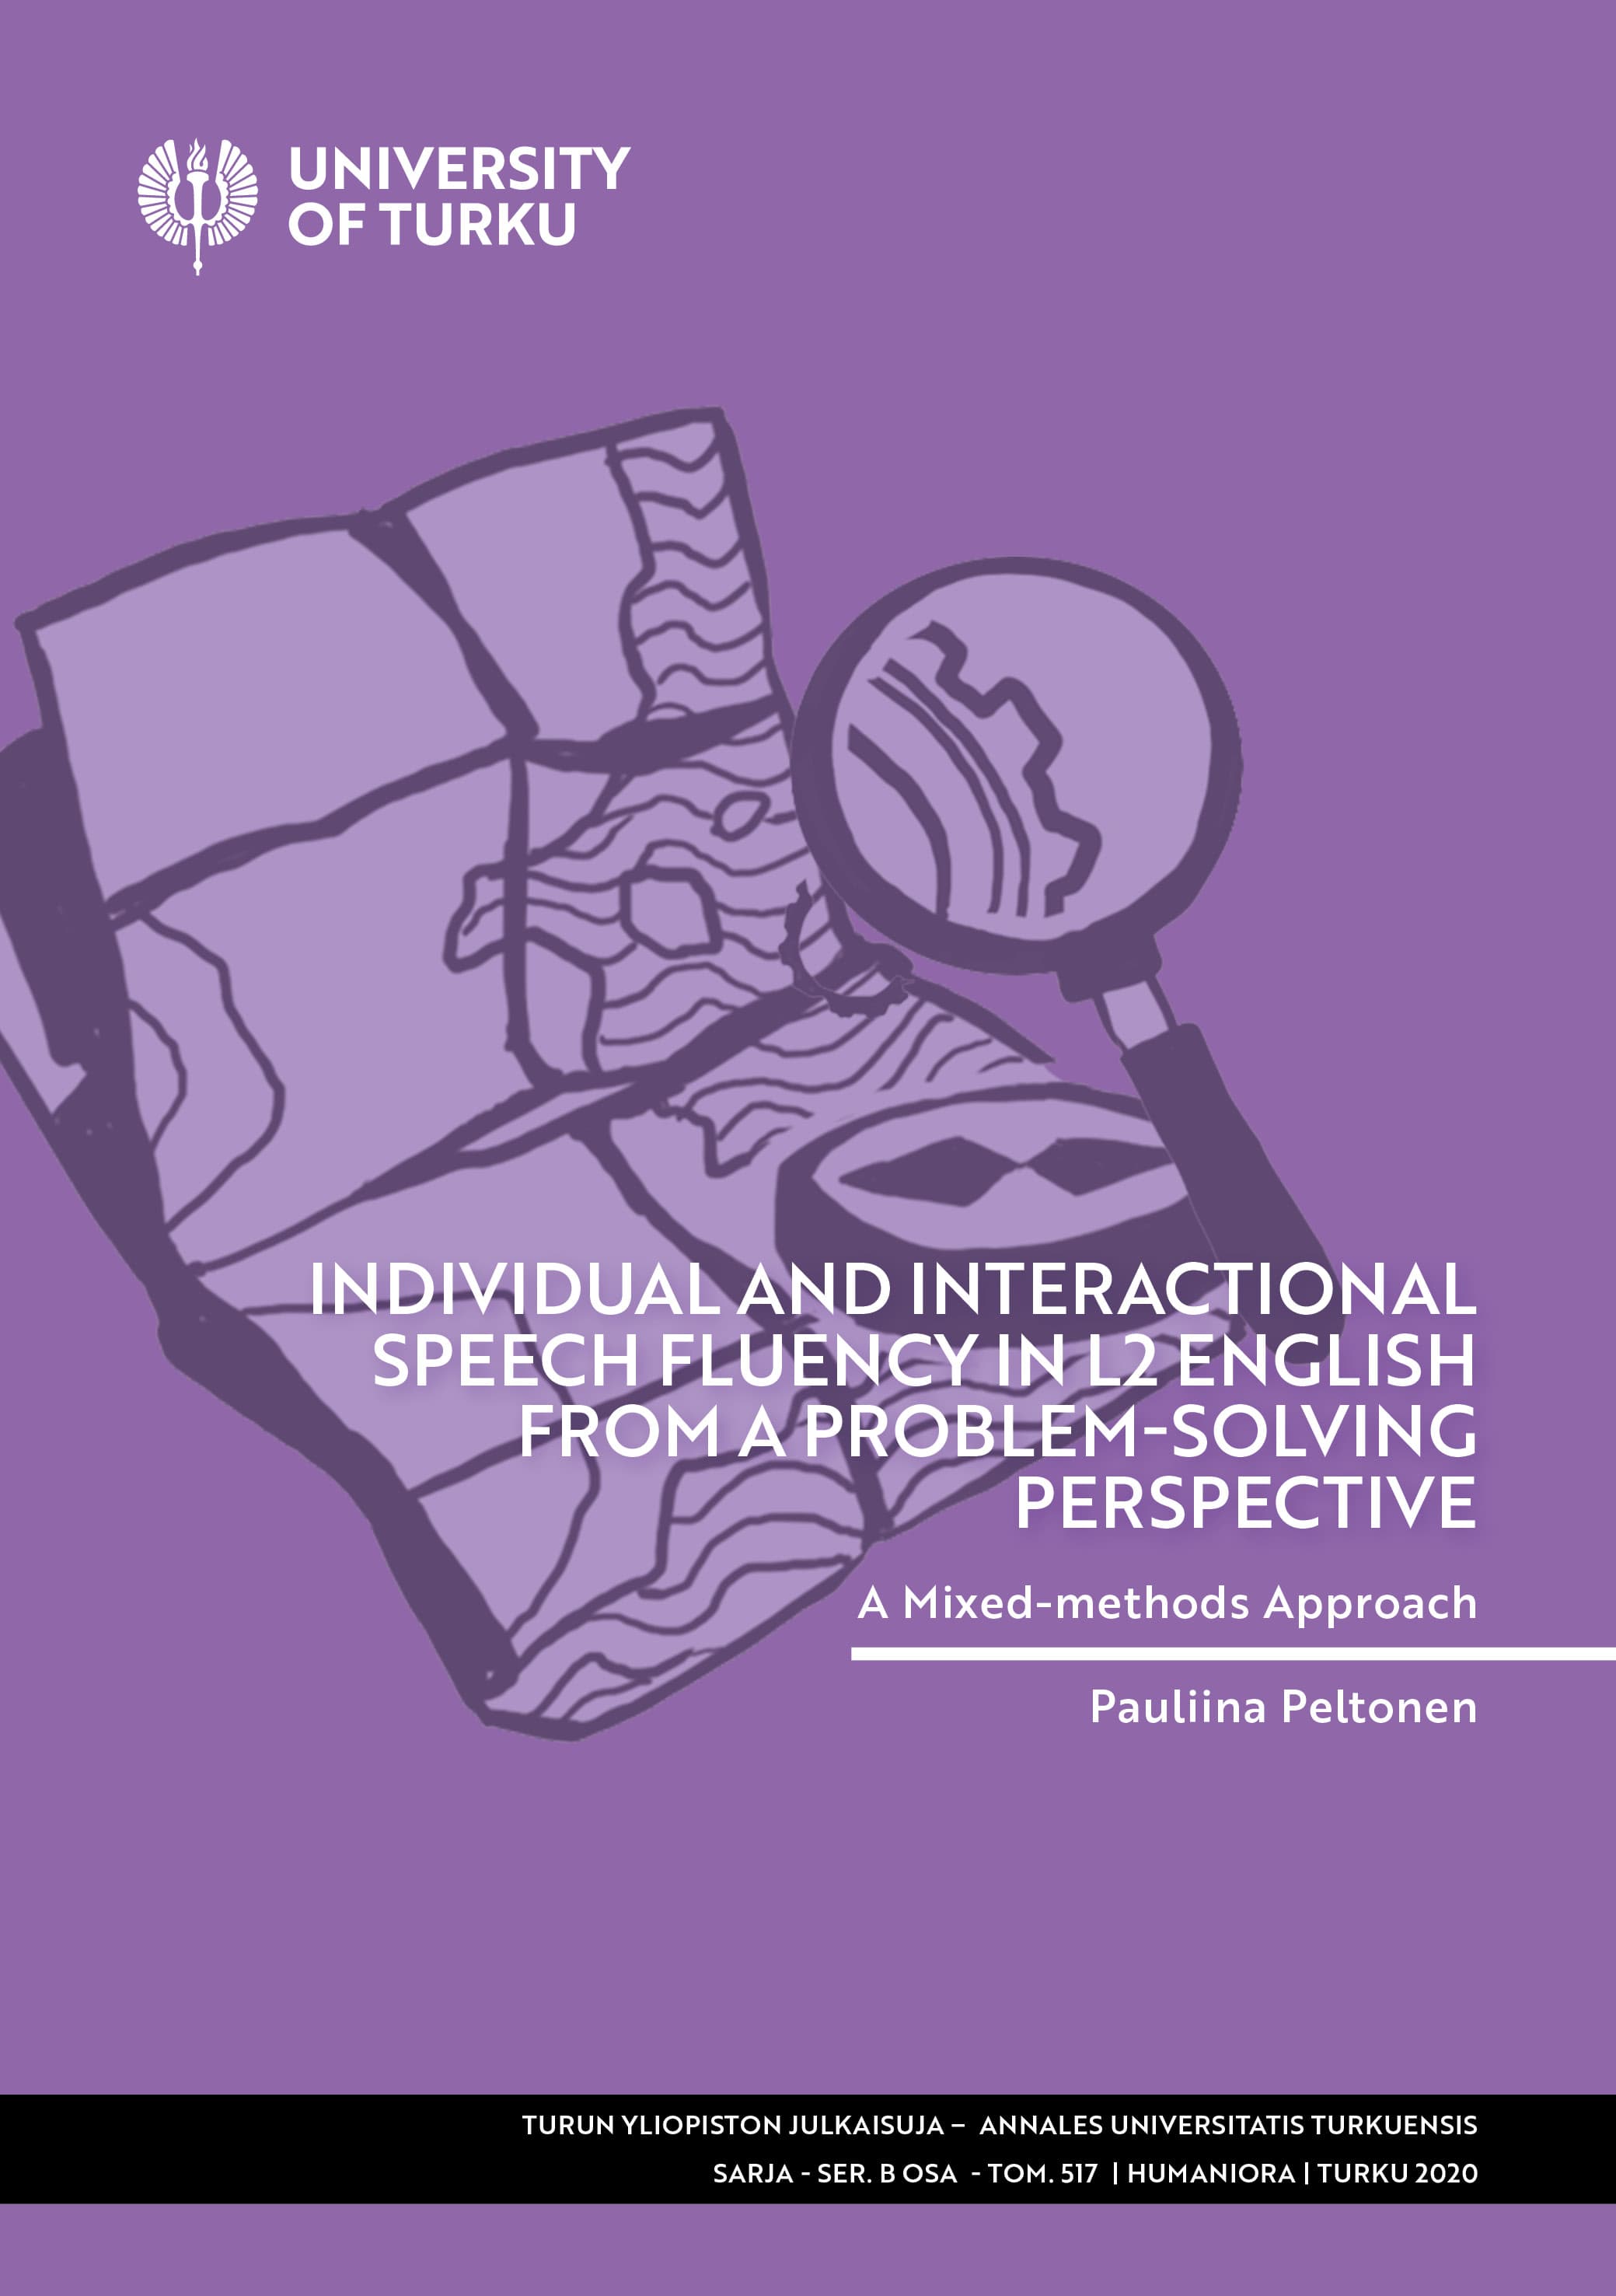 Individual and Interactional Speech Fluency in L2 English from a Problem-solving Perspective: A Mixed-methods Approach